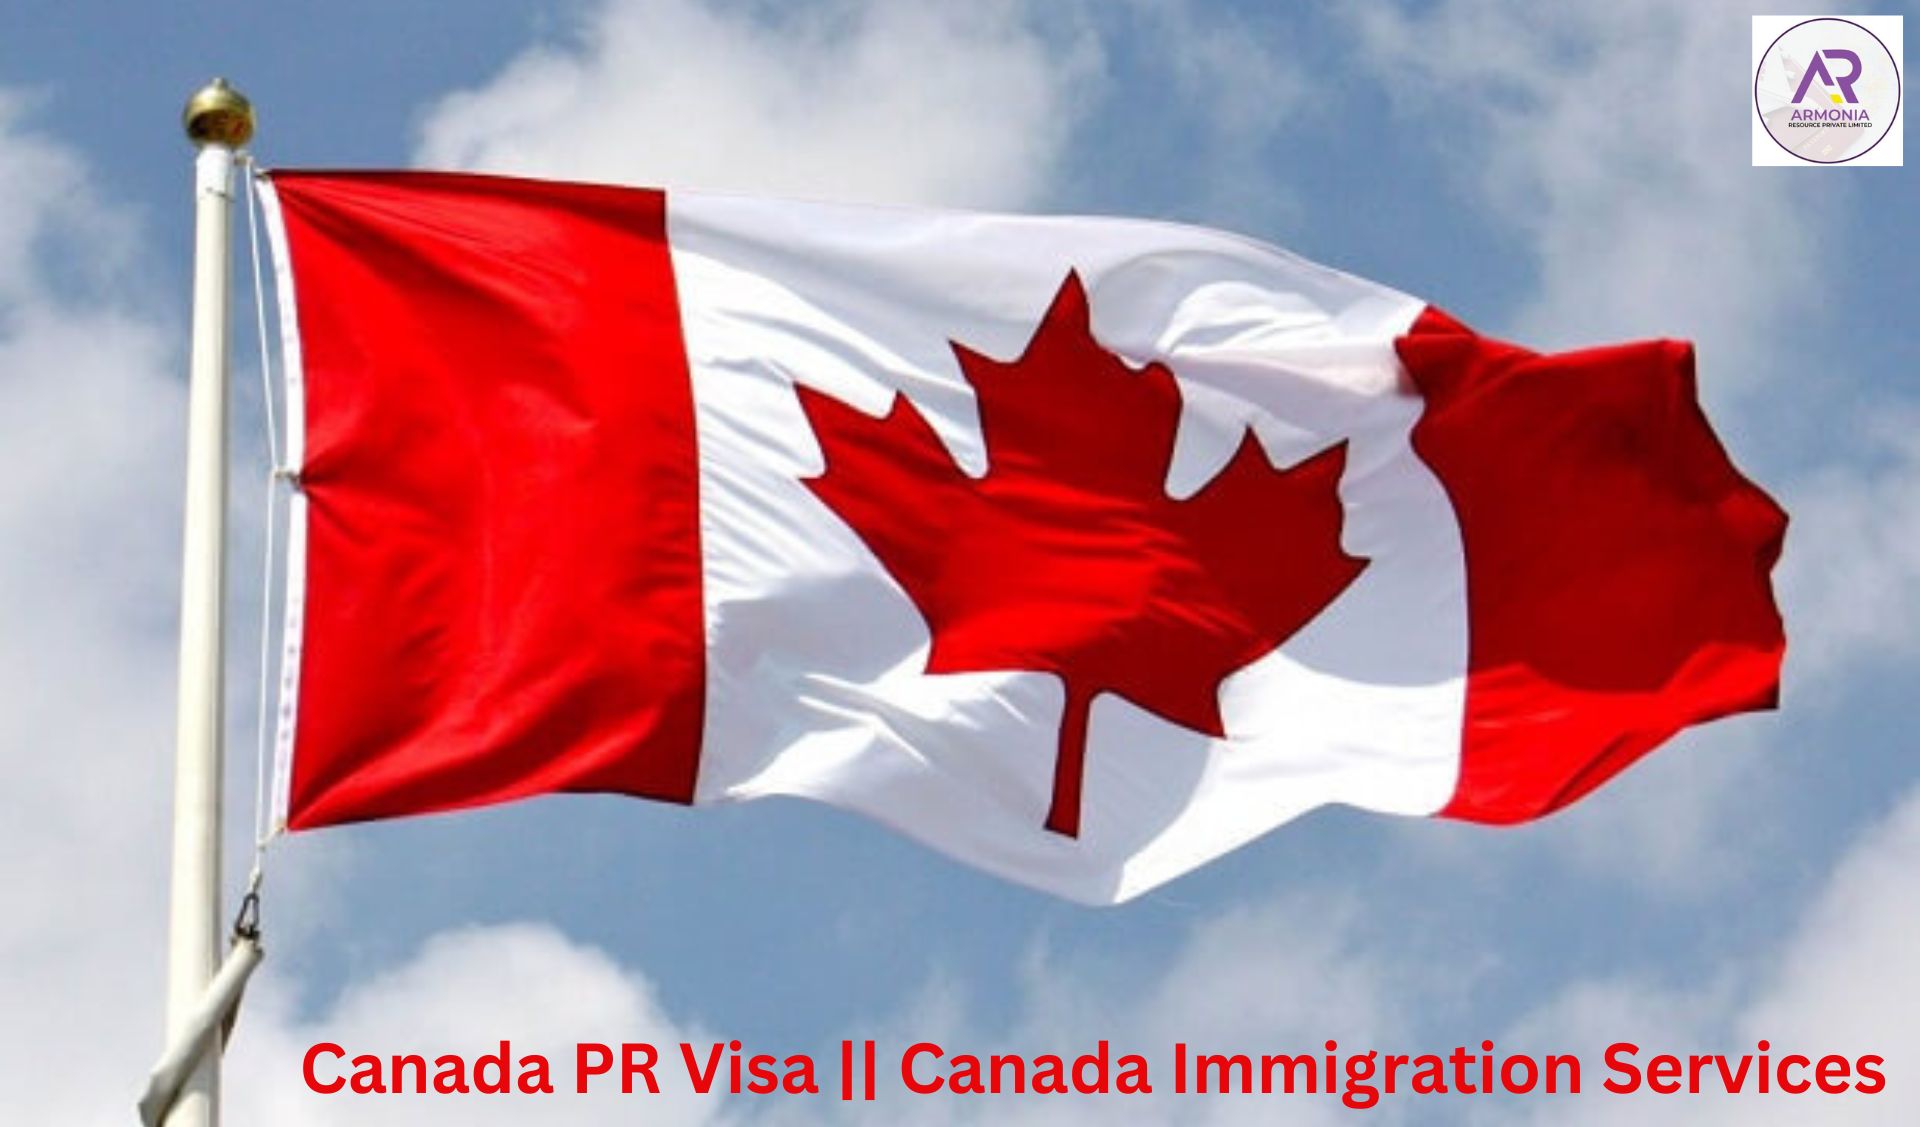 Your Path to Canada: Exploring Permanent Residency Options with Armonia Resource